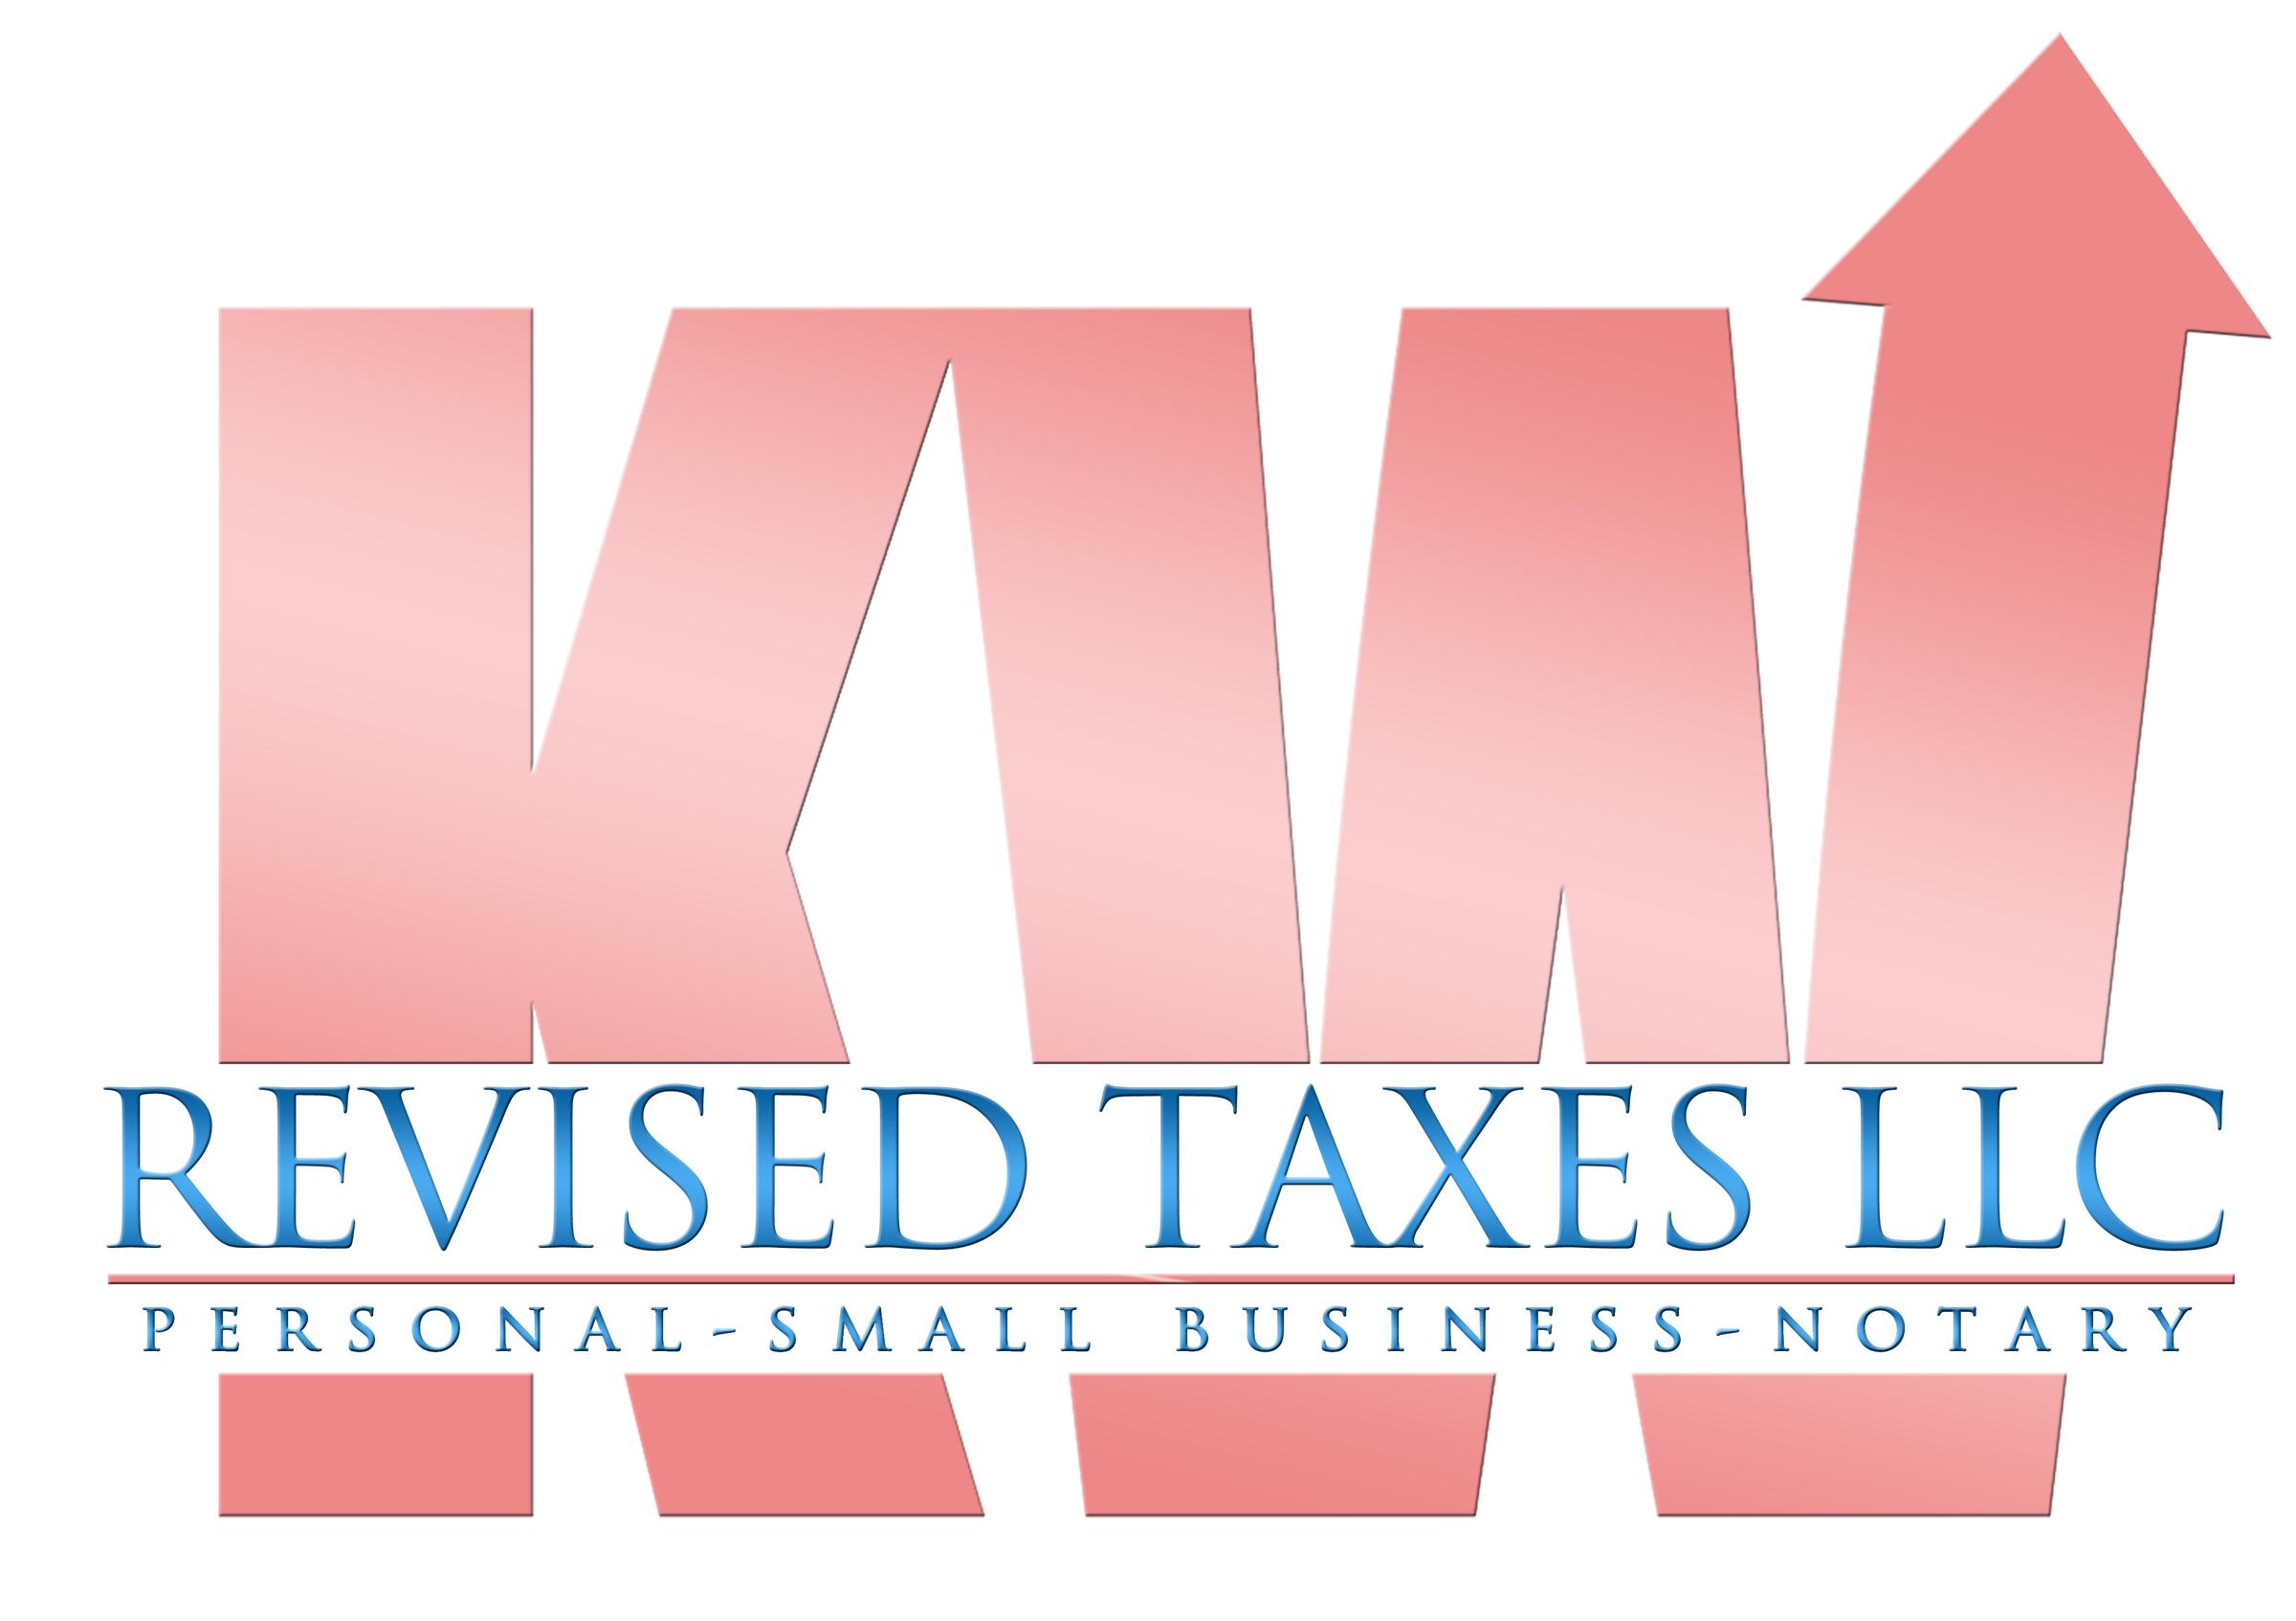 Tax Software KW Revised Taxes LLC